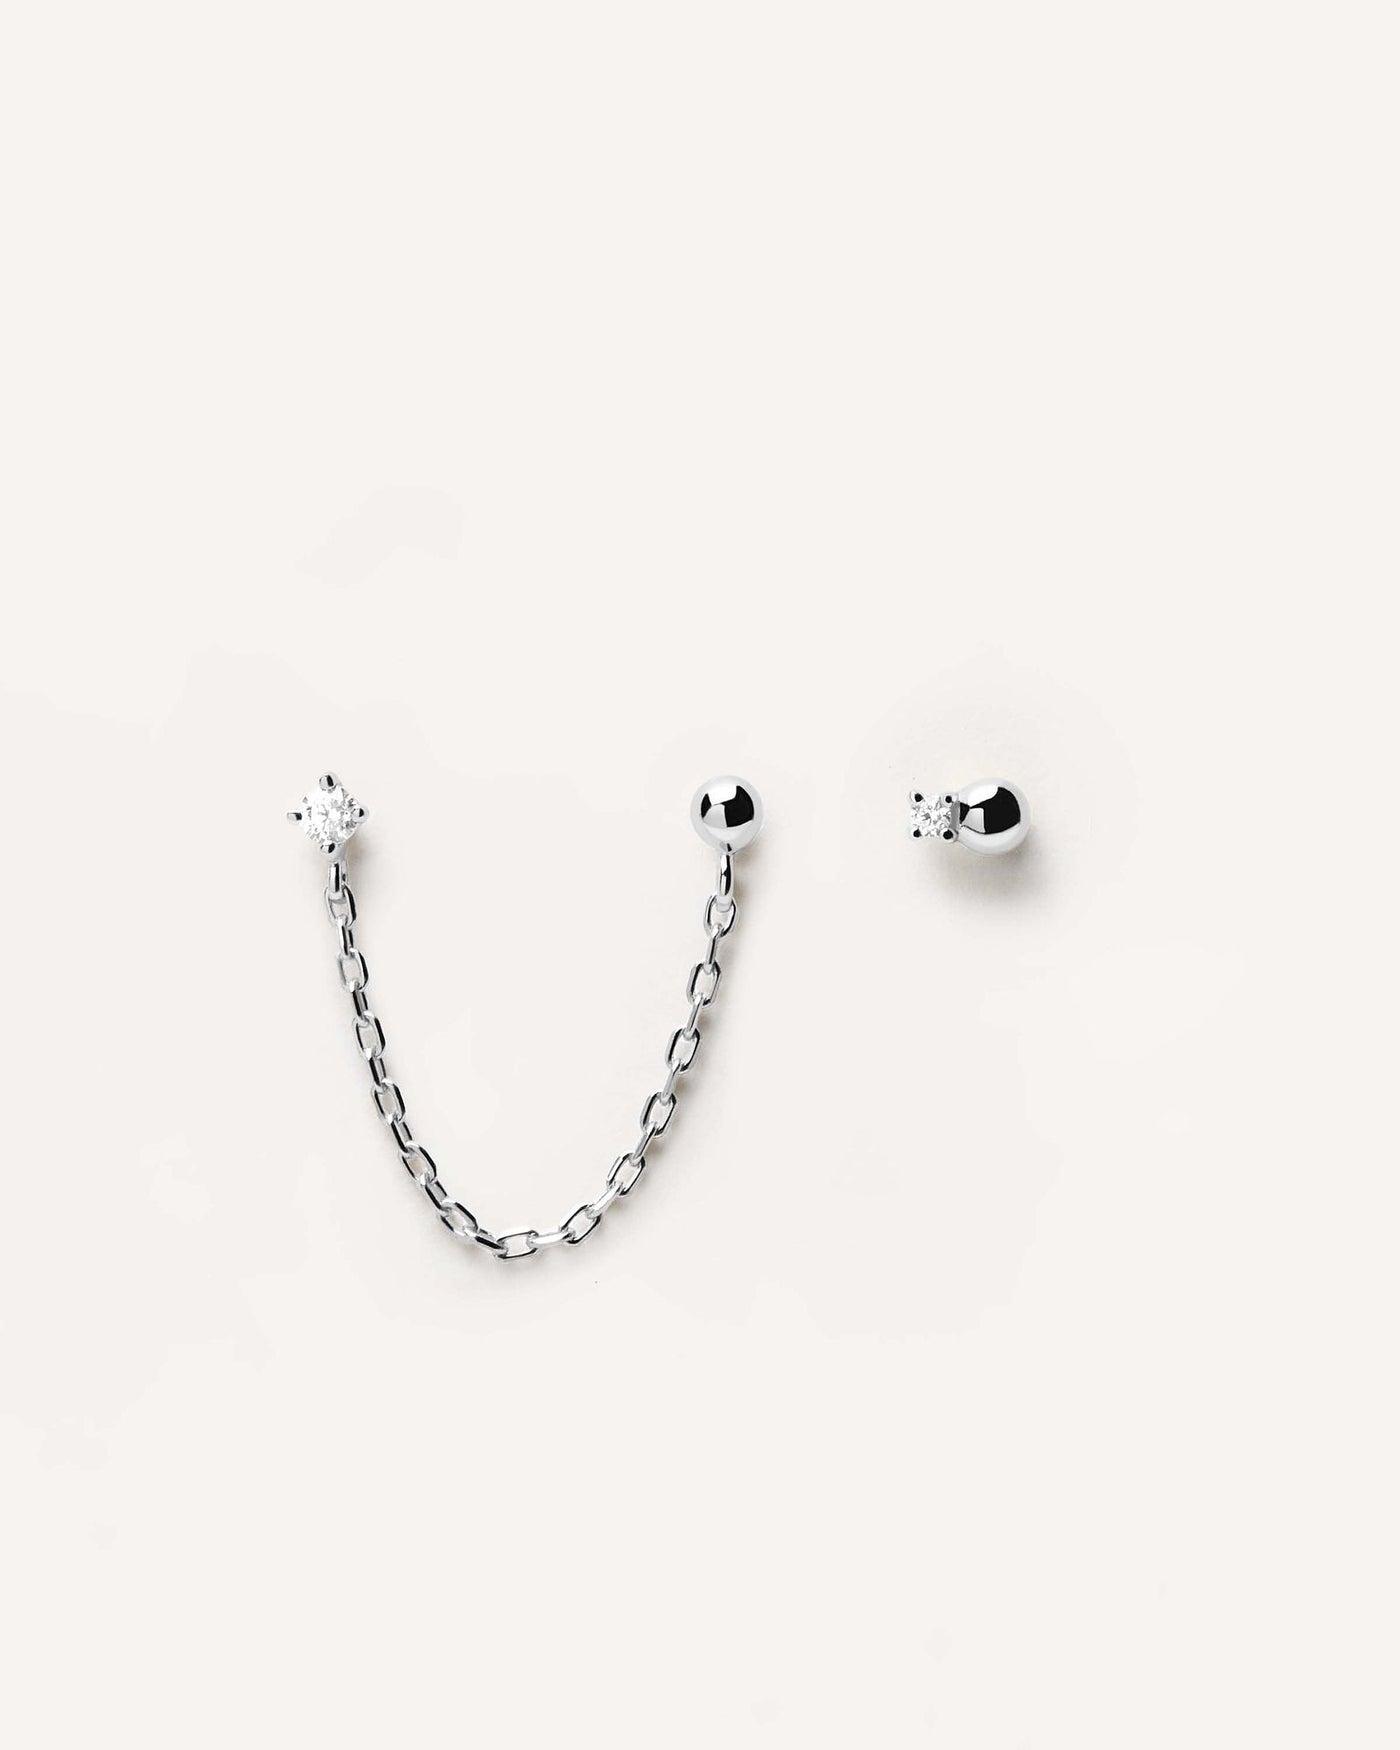 2024 Selection | Musketeer Silver Earrings. Chain linked and single 925 sterling silver studs set with two white zirconia stones. Get the latest arrival from PDPAOLA. Place your order safely and get this Best Seller. Free Shipping.